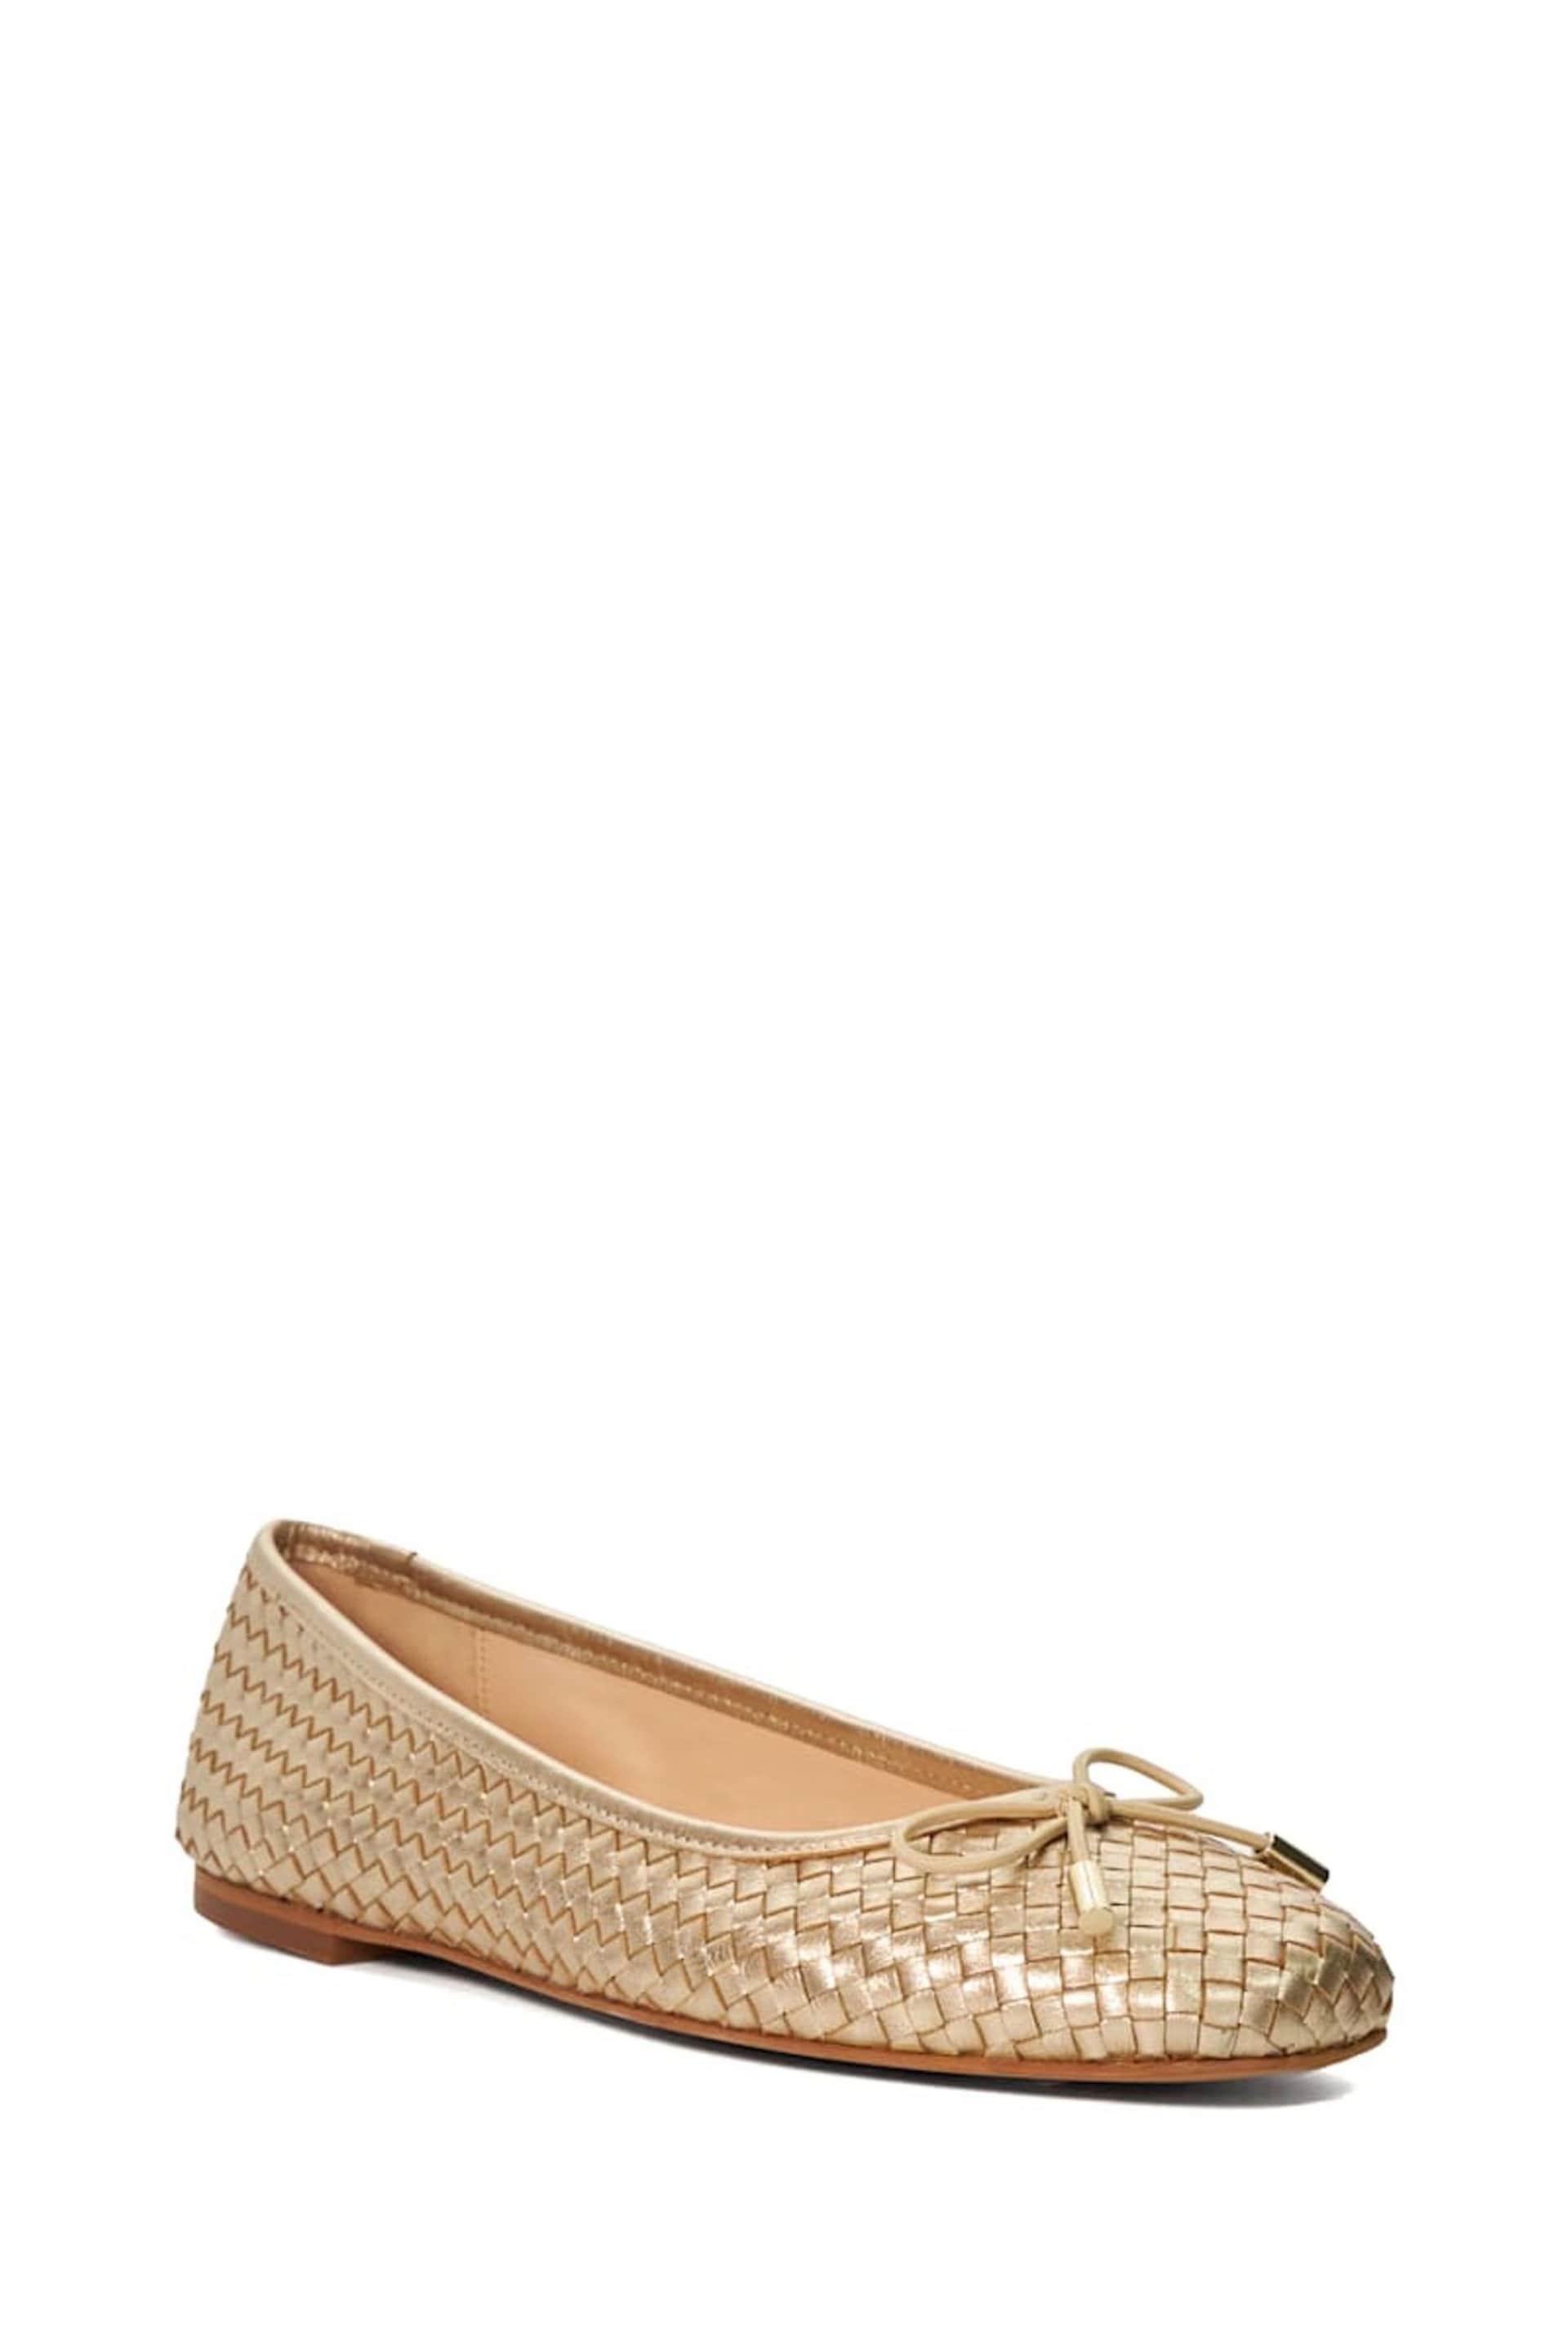 Dune London Gold Heights Flexible Sole Woven Ballerina Flat Shoes - Image 2 of 7